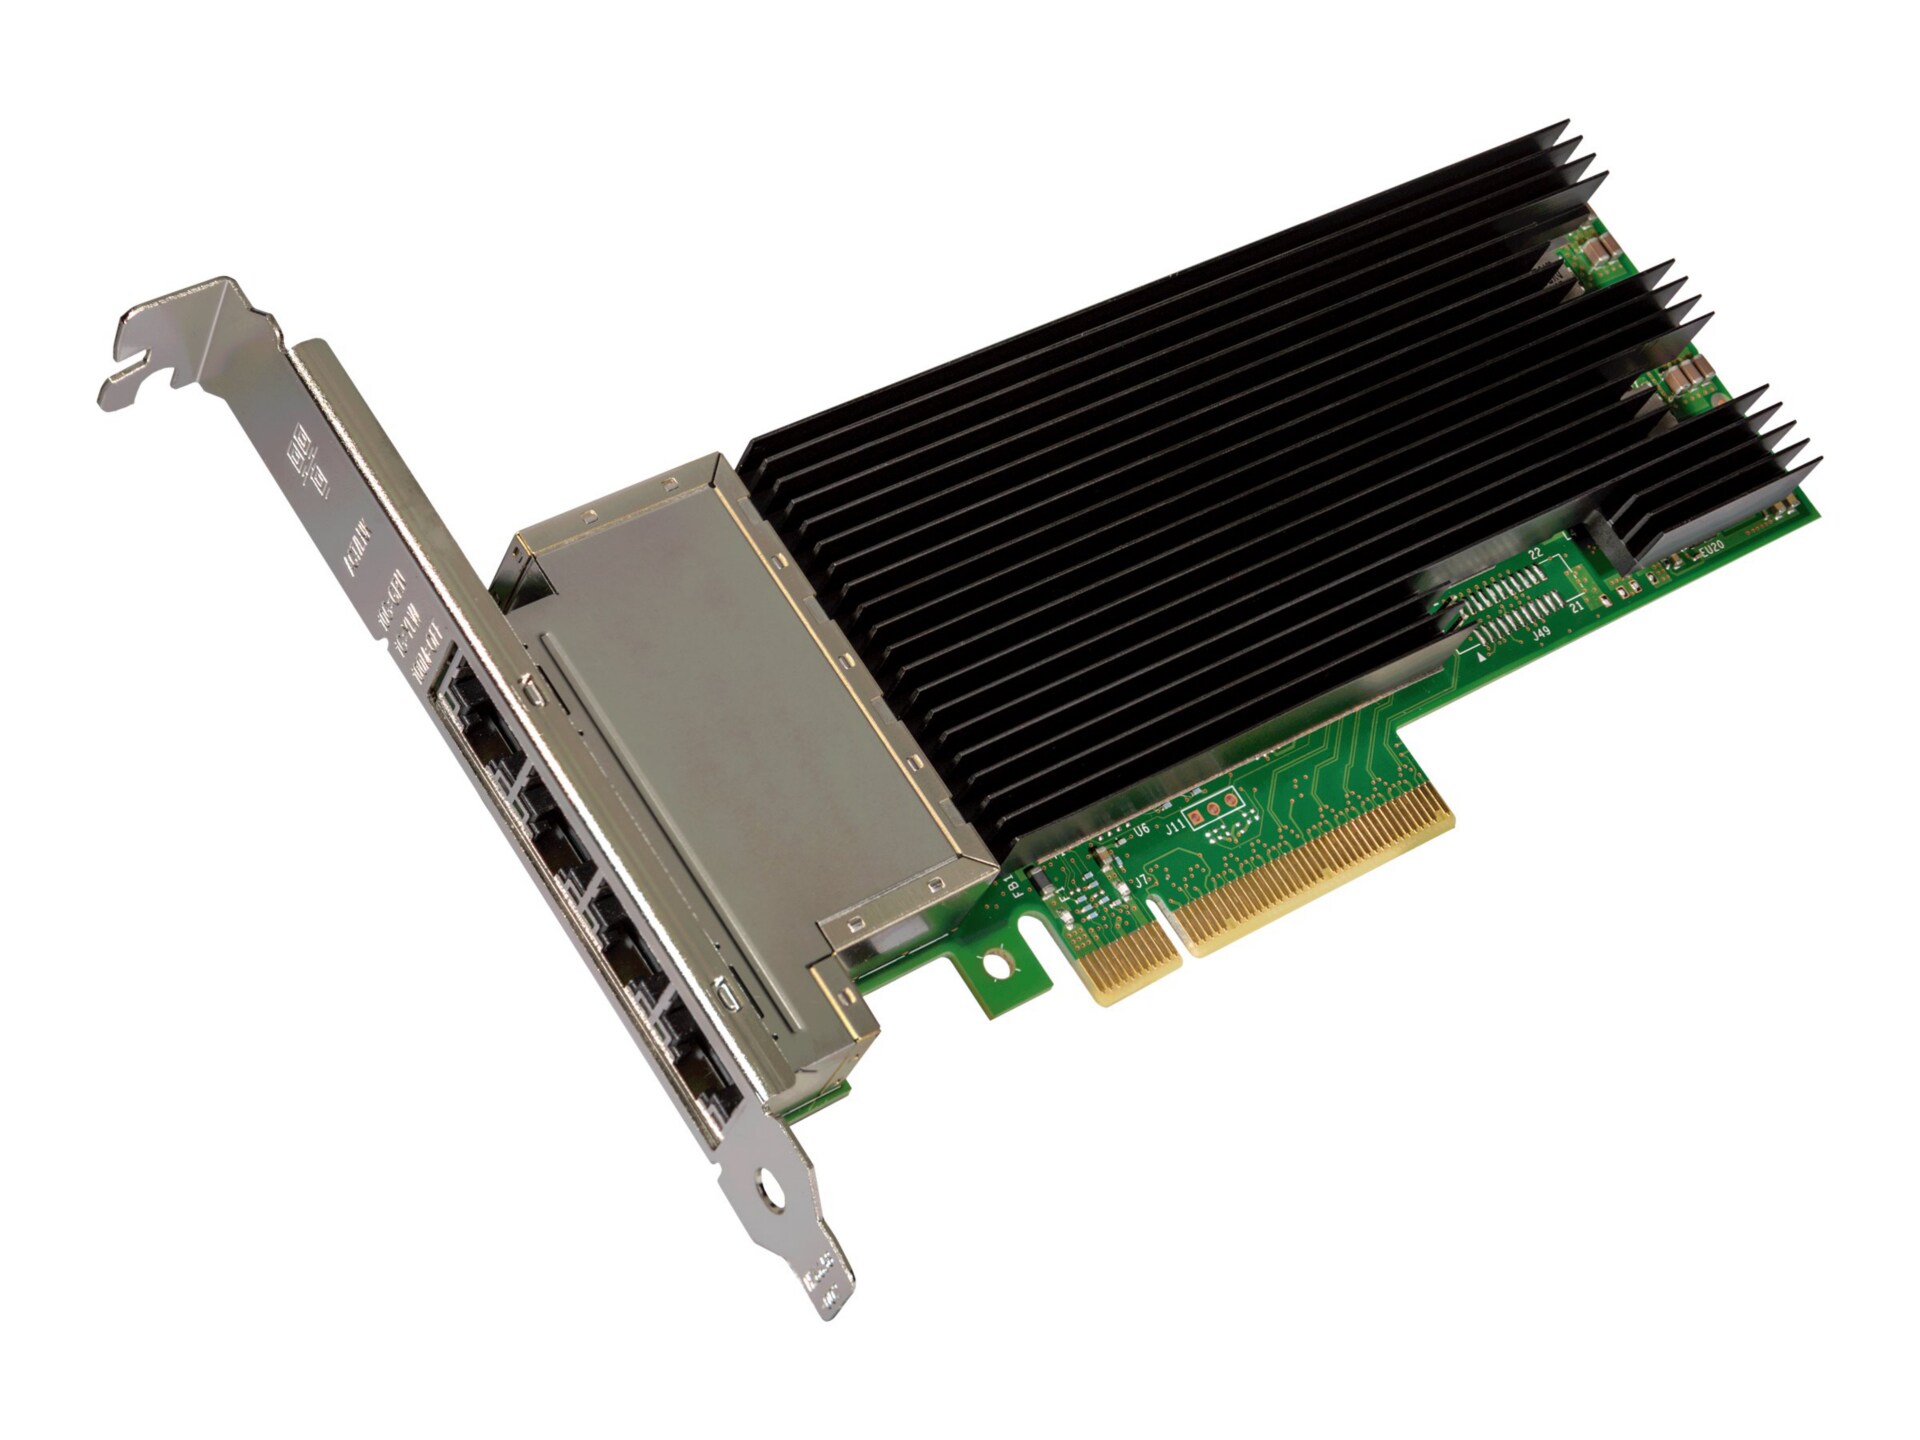 Intel Ethernet Converged Network Adapter X710-T4 - network adapter - PCIe 3